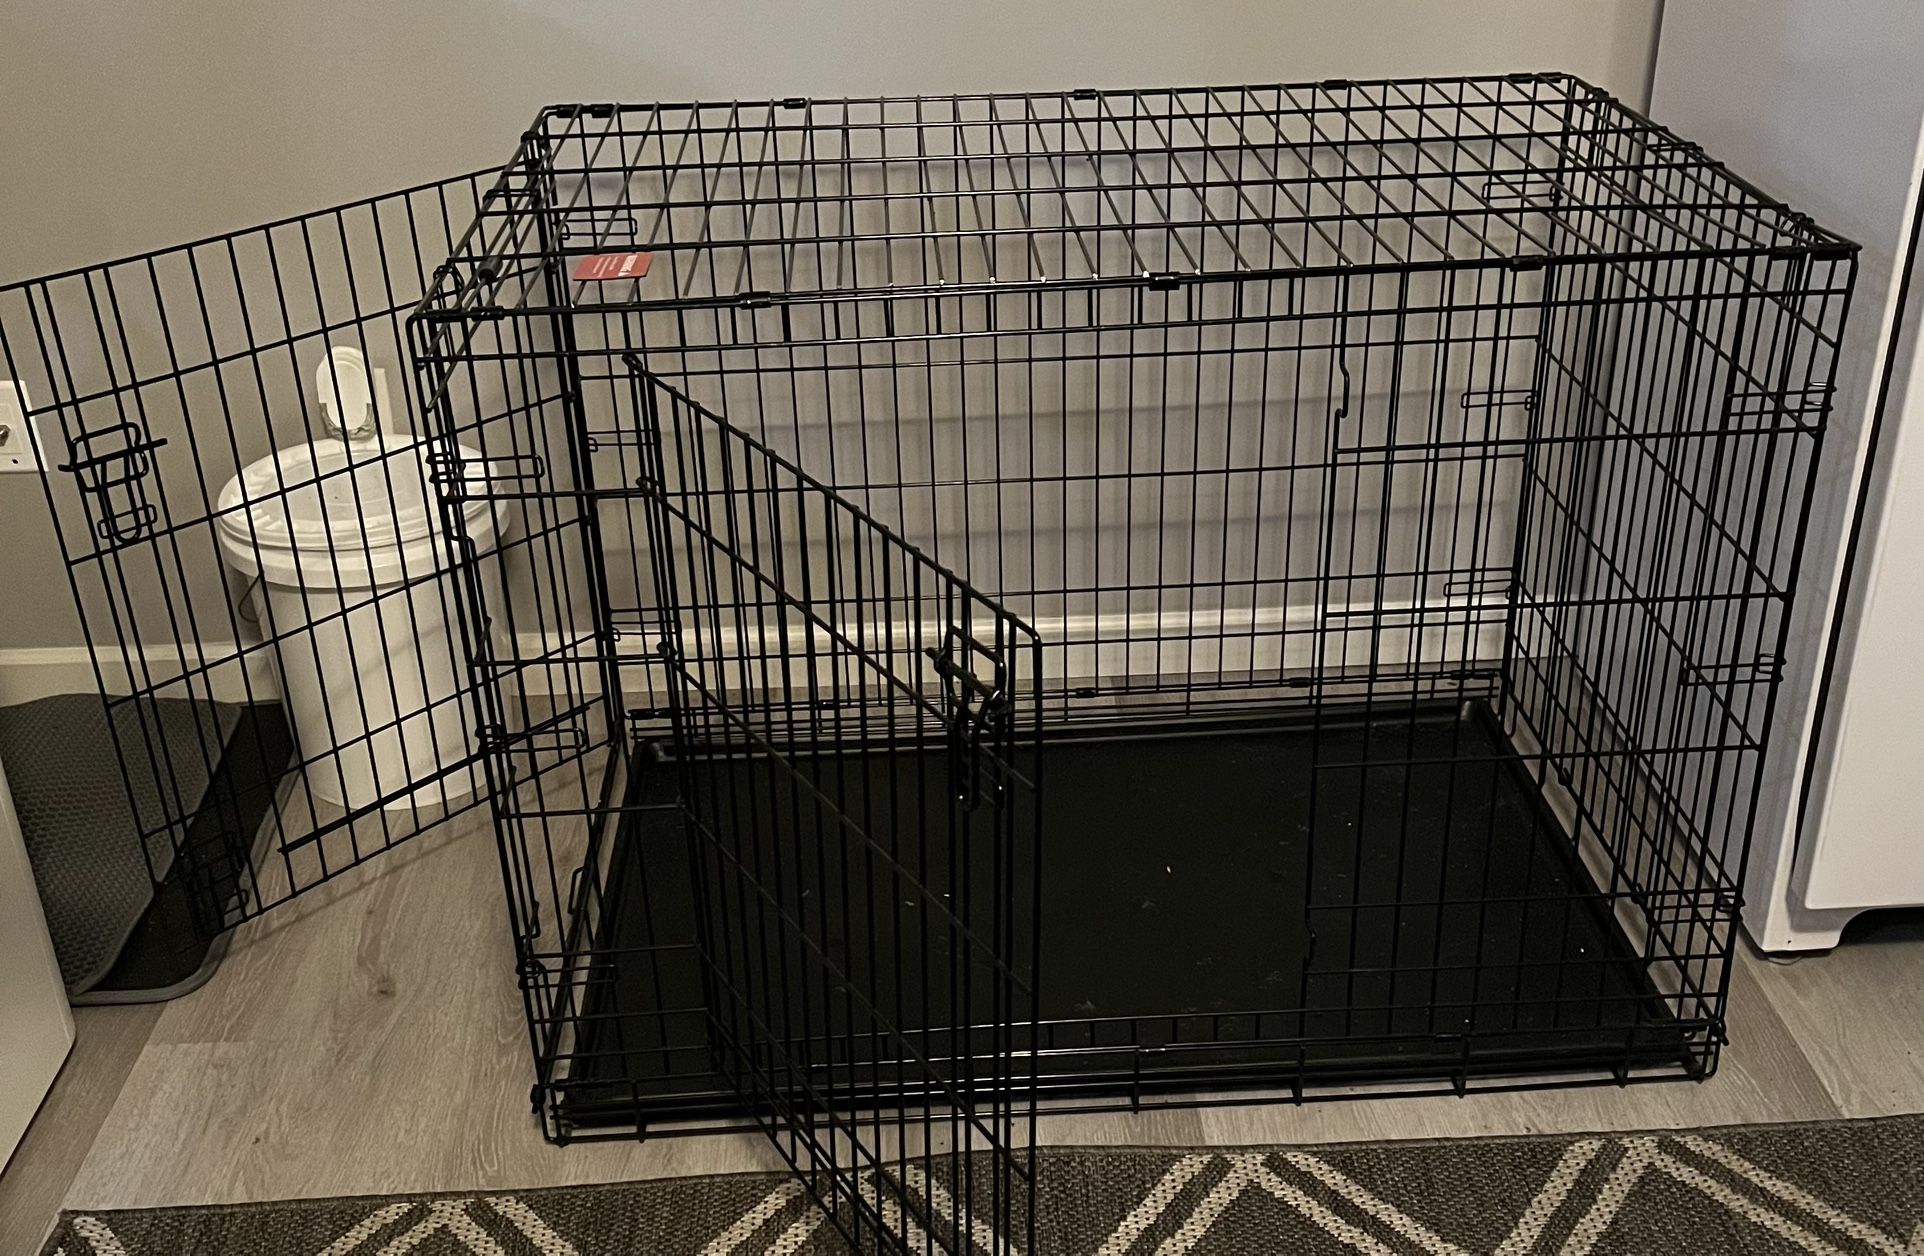 Large Kong Dog Crate With Divider